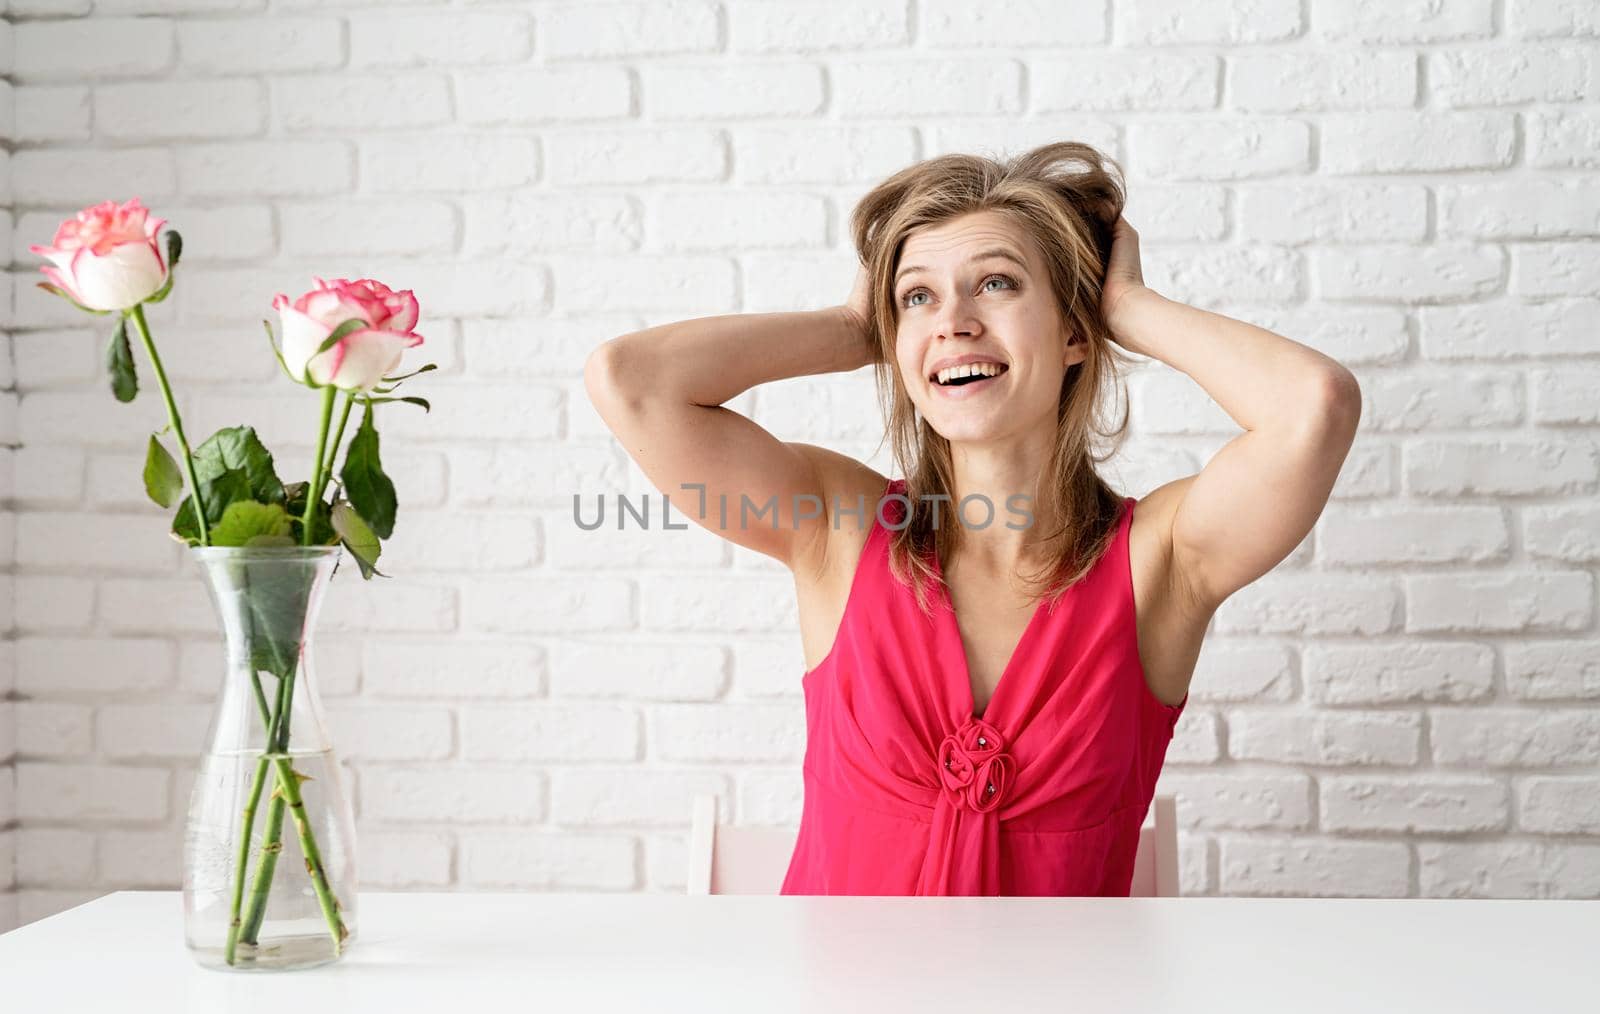 Happy young woman in pink dress daydreamimg or thinking about something nice by Desperada